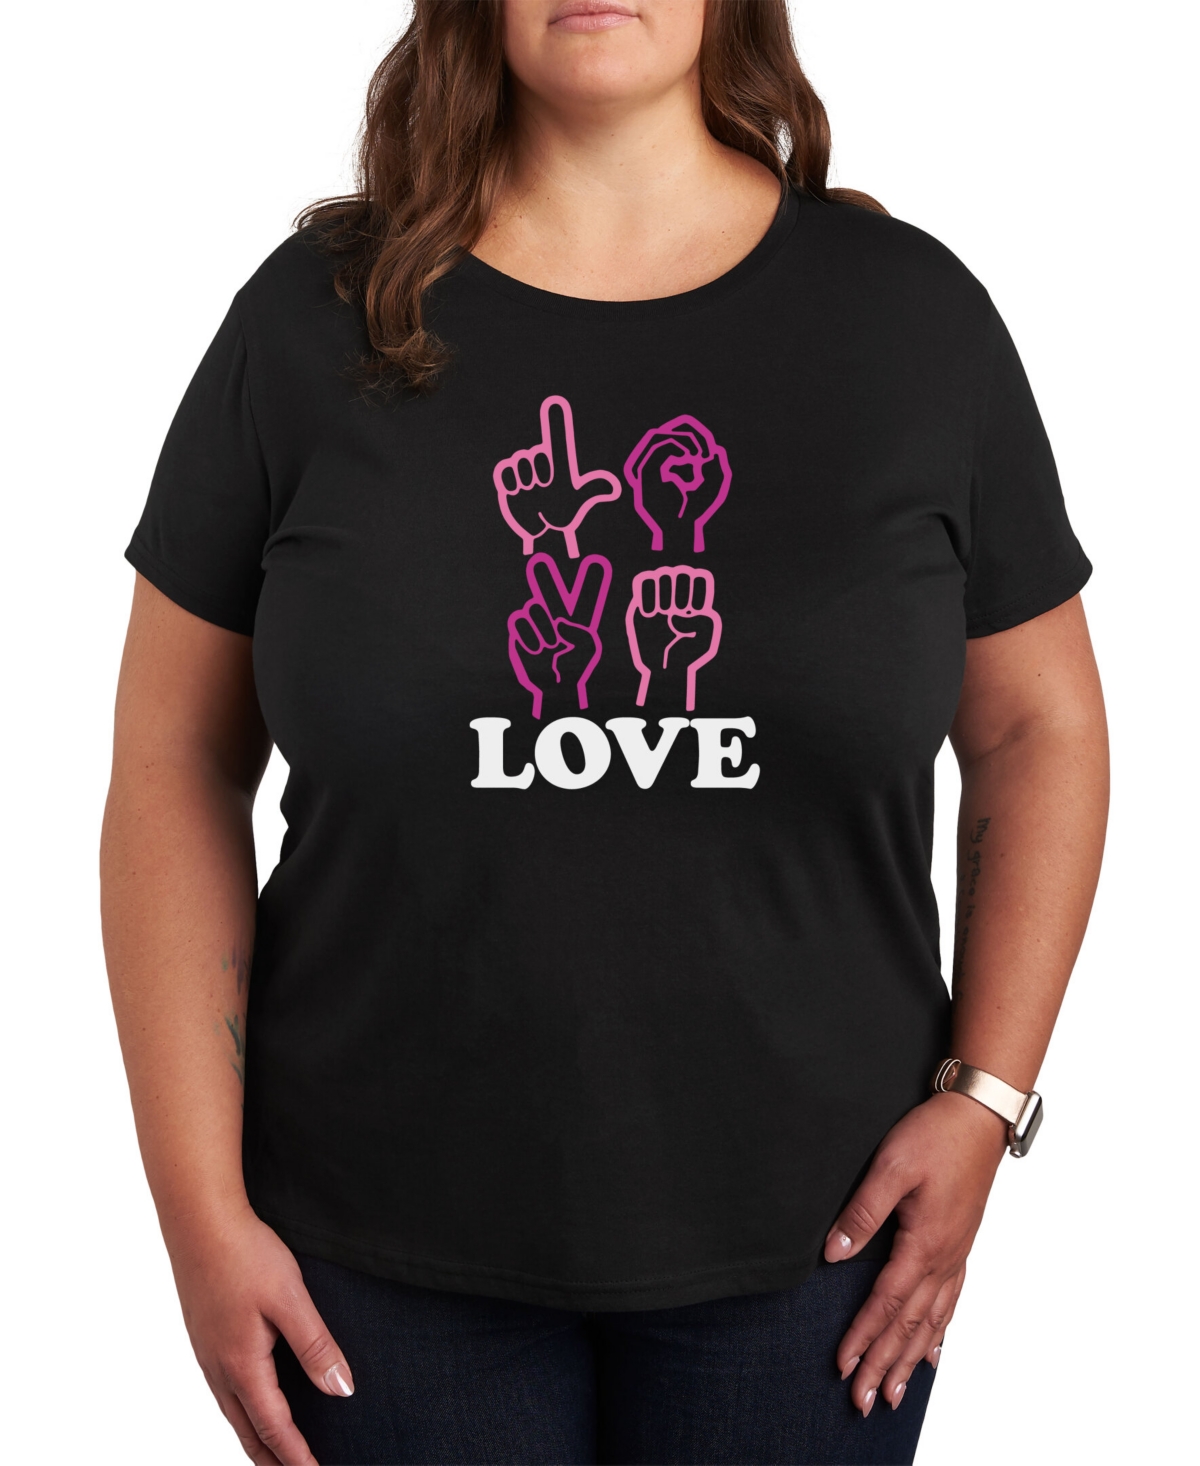 Air Waves Trendy Plus Size Valentine's Day Graphic T-shirt - Black